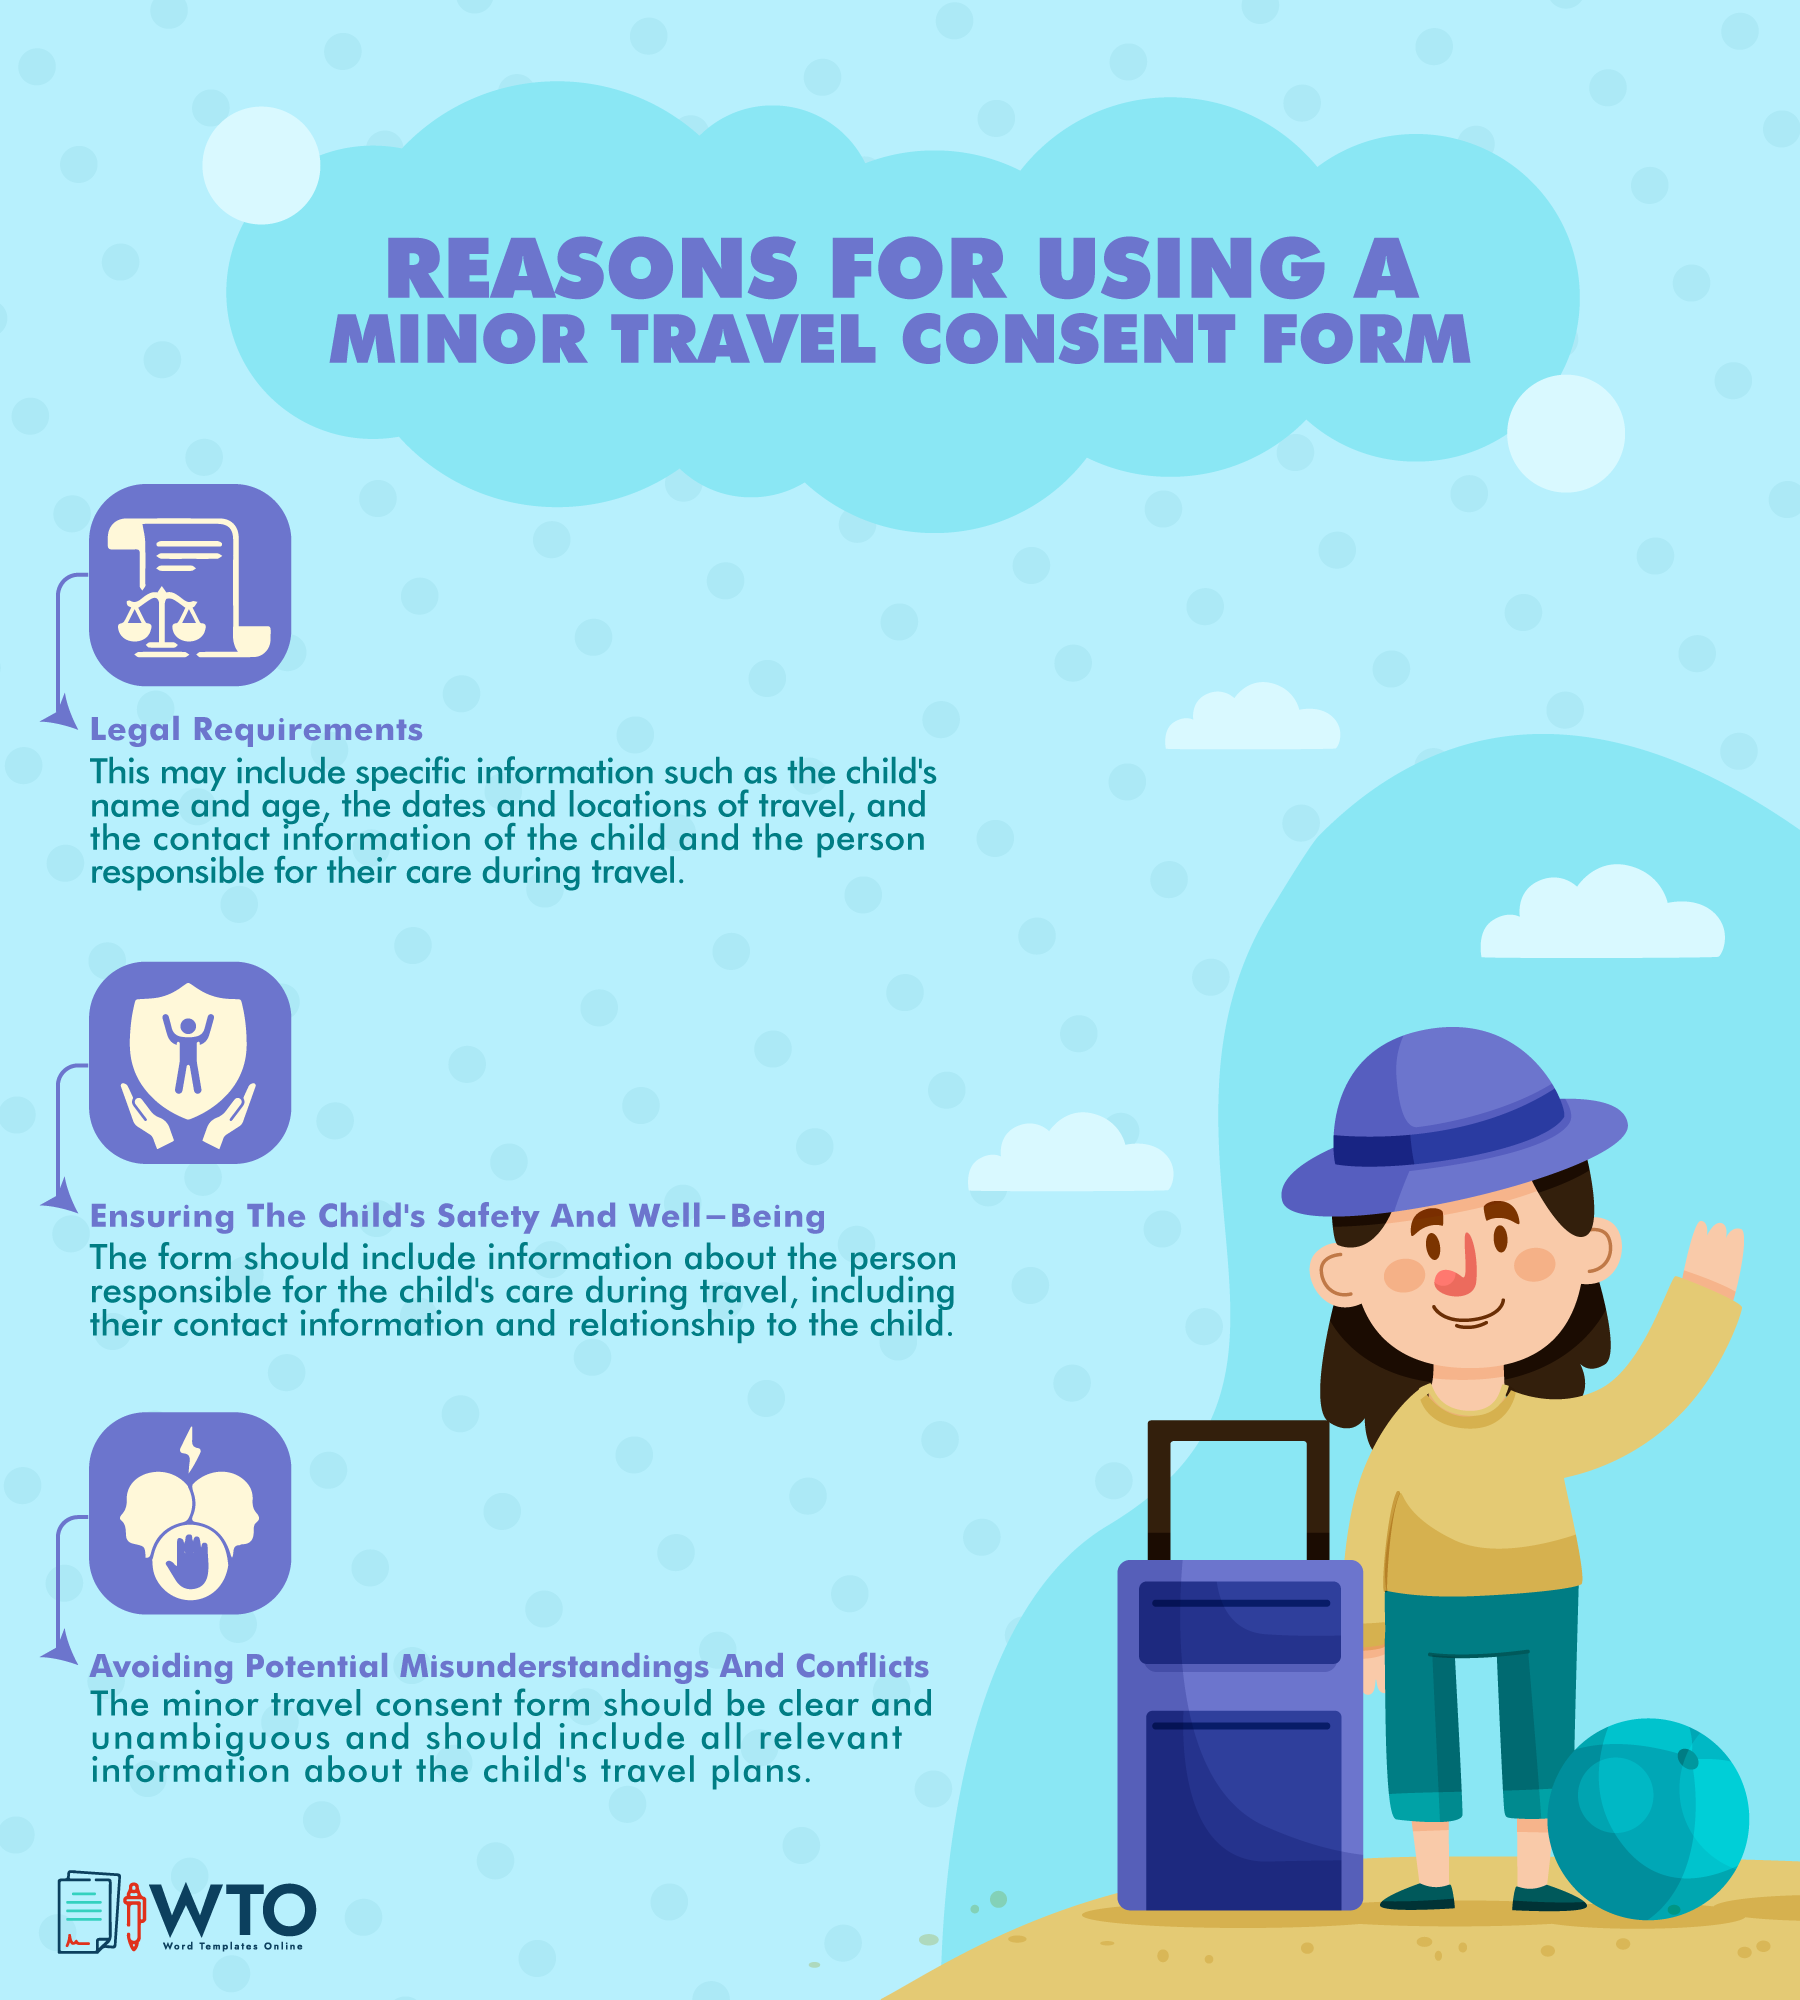 This infographic is about reasons for using minor travel consent form.